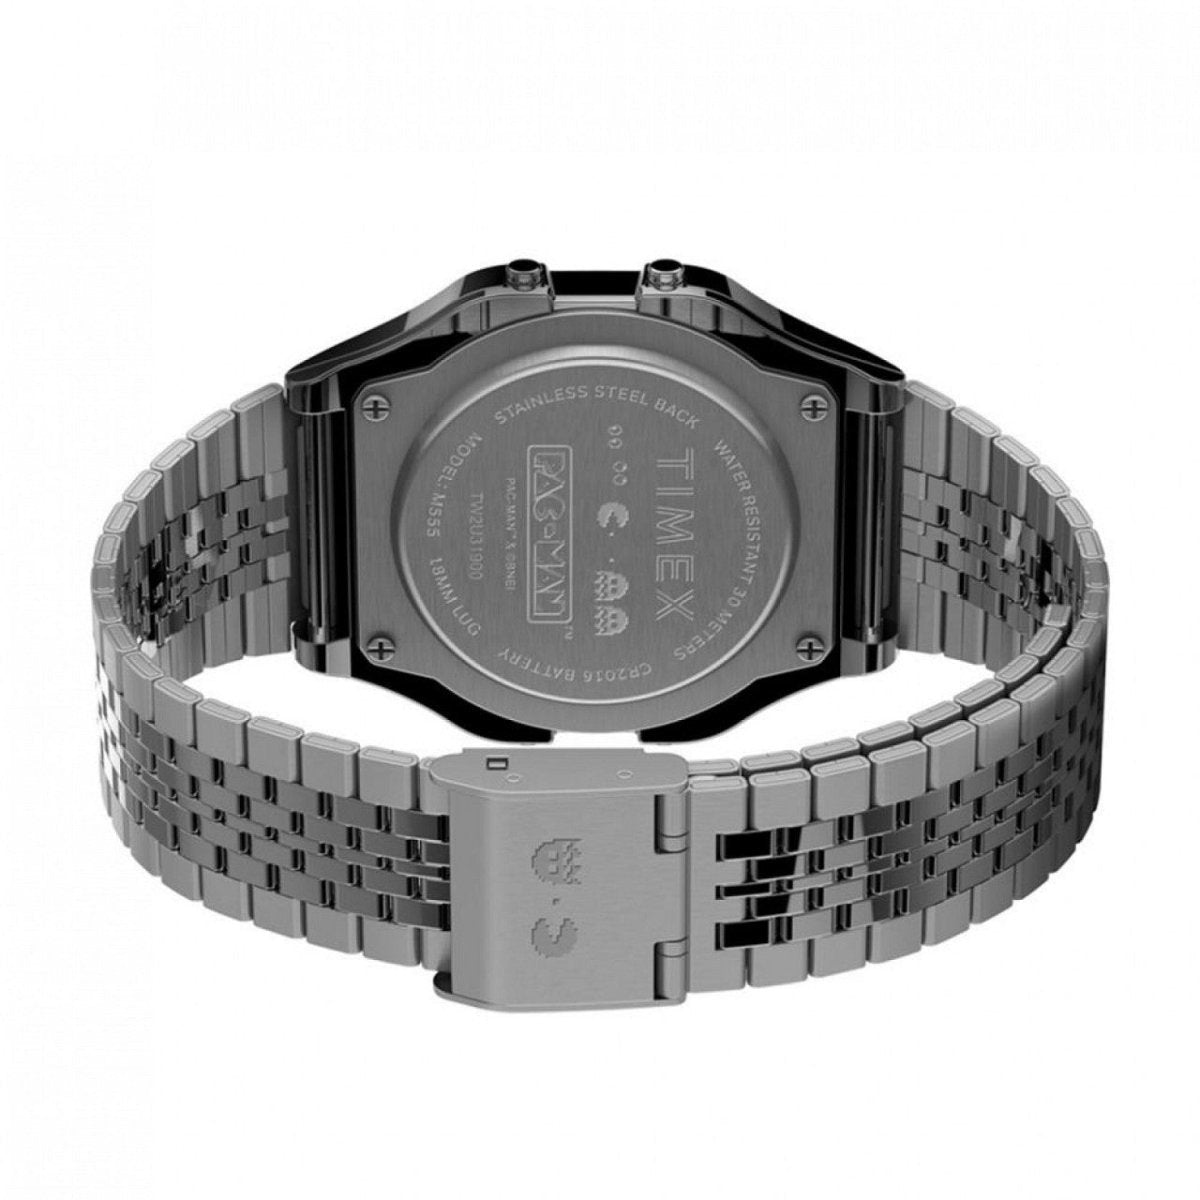 Timex Archive T80 X PAC-MAN 34mm (Silber)  - Allike Store